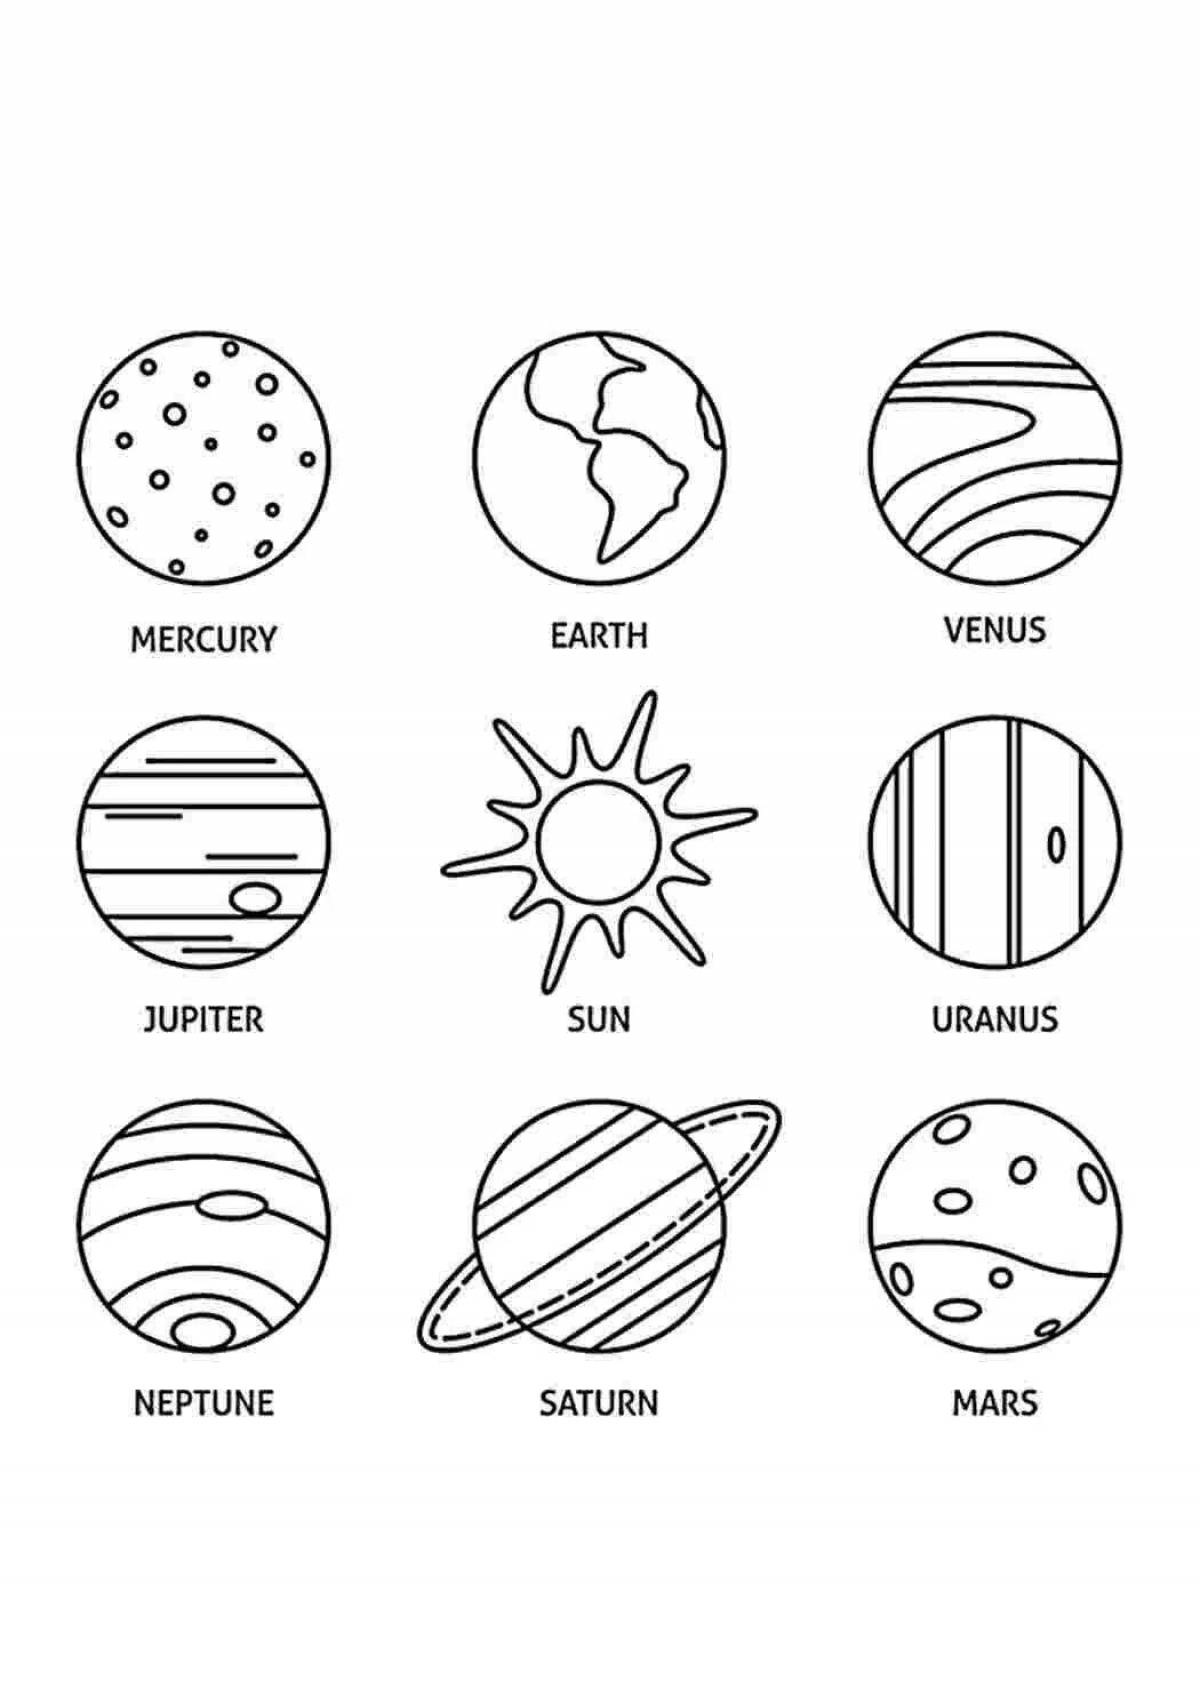 A wonderful coloring of the planets of the solar system in order from the sun